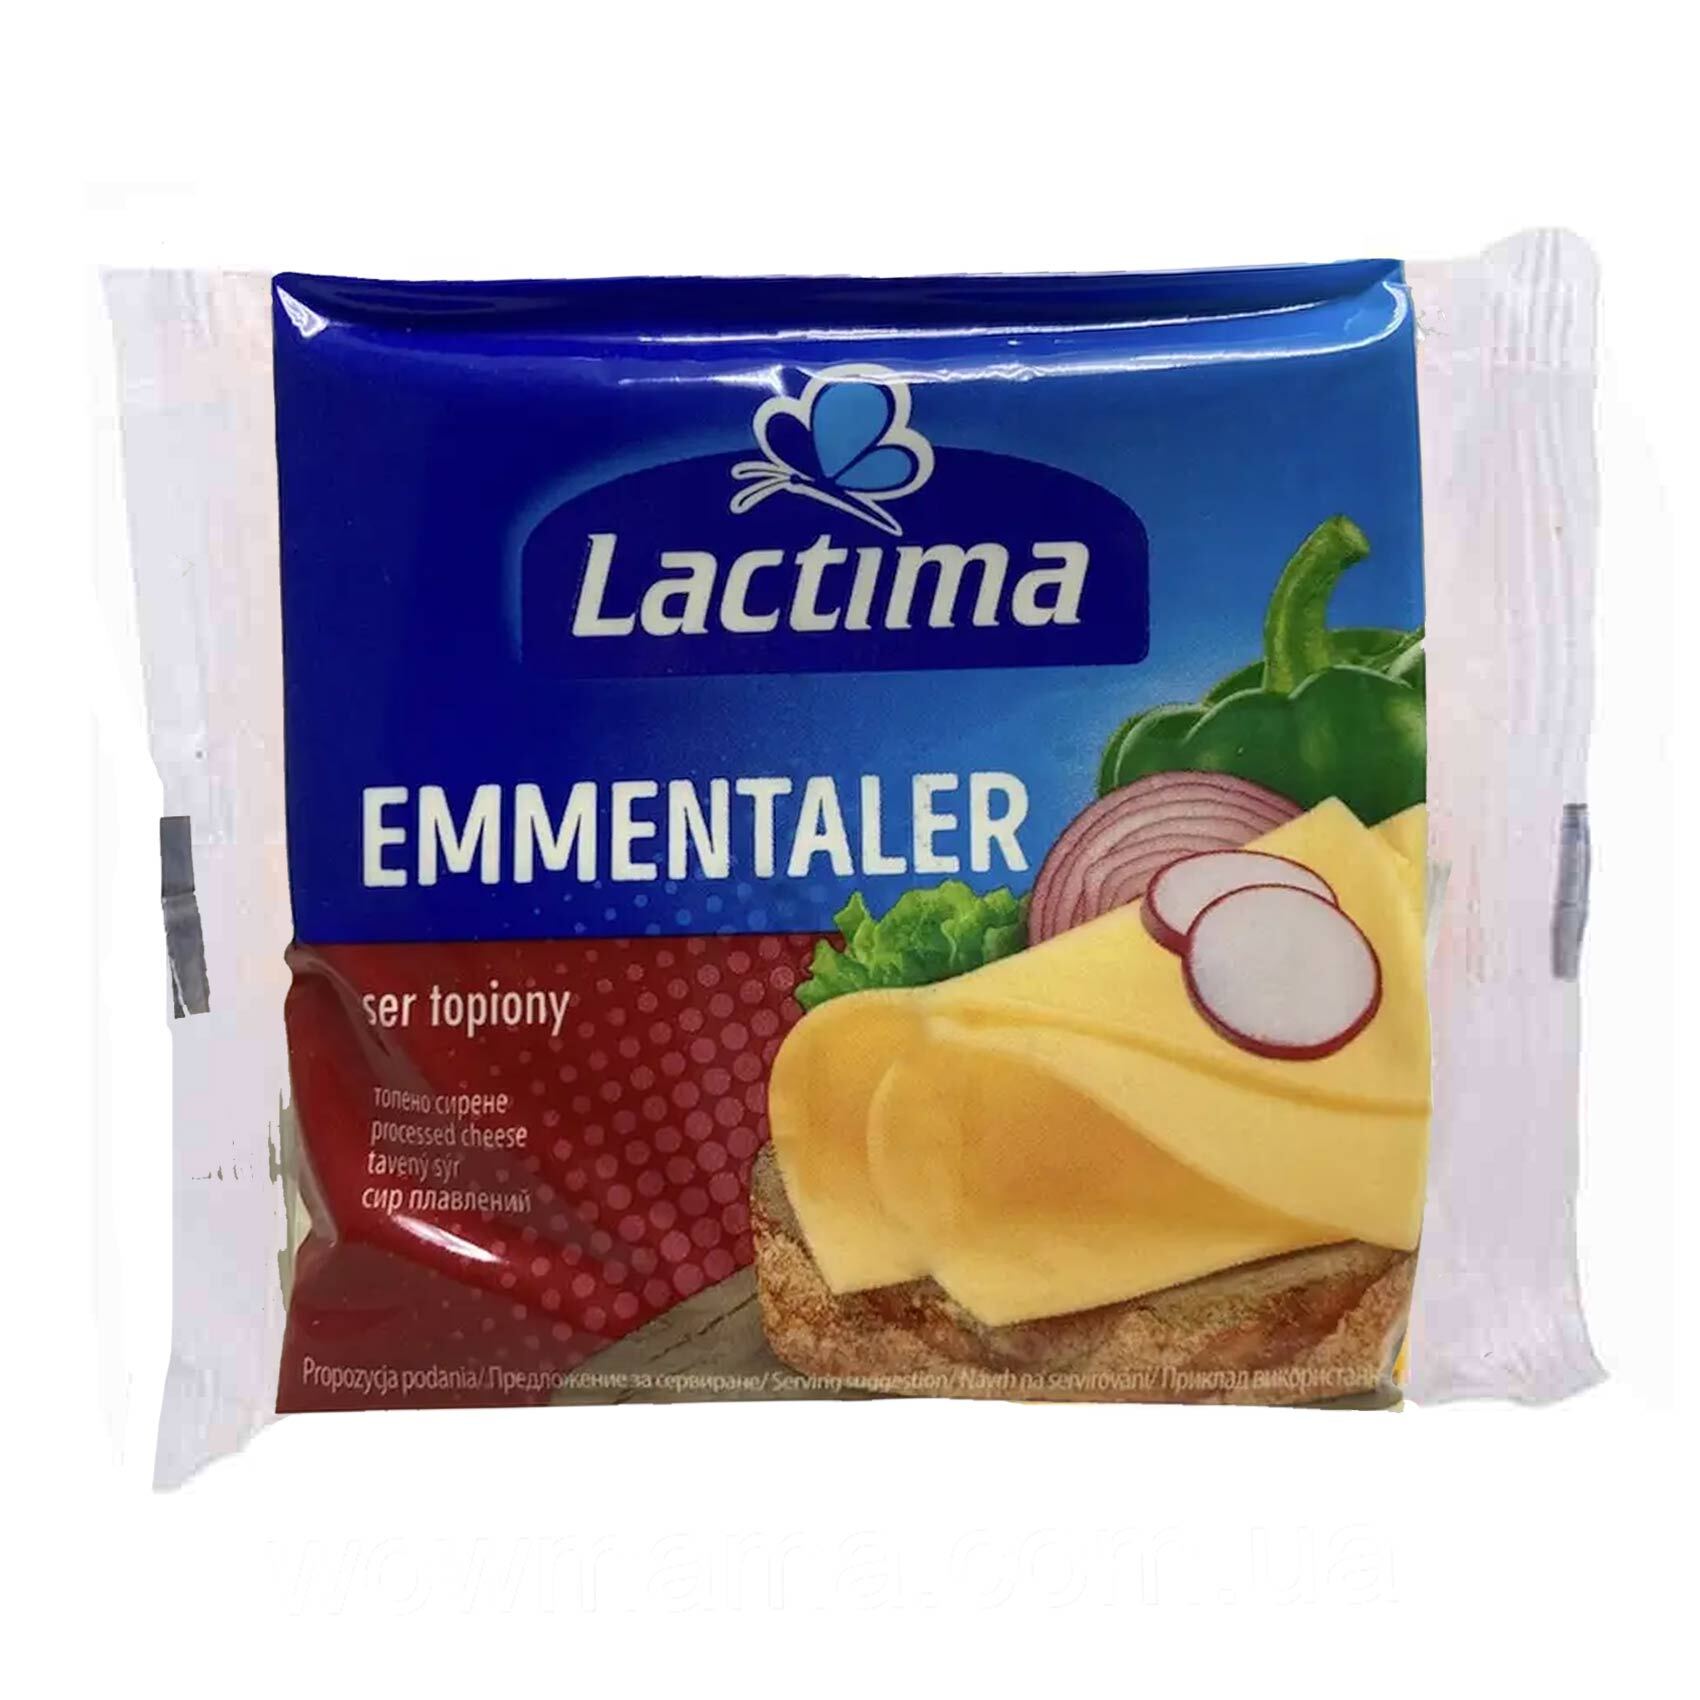 Emmental Cheese - VIMA Foods